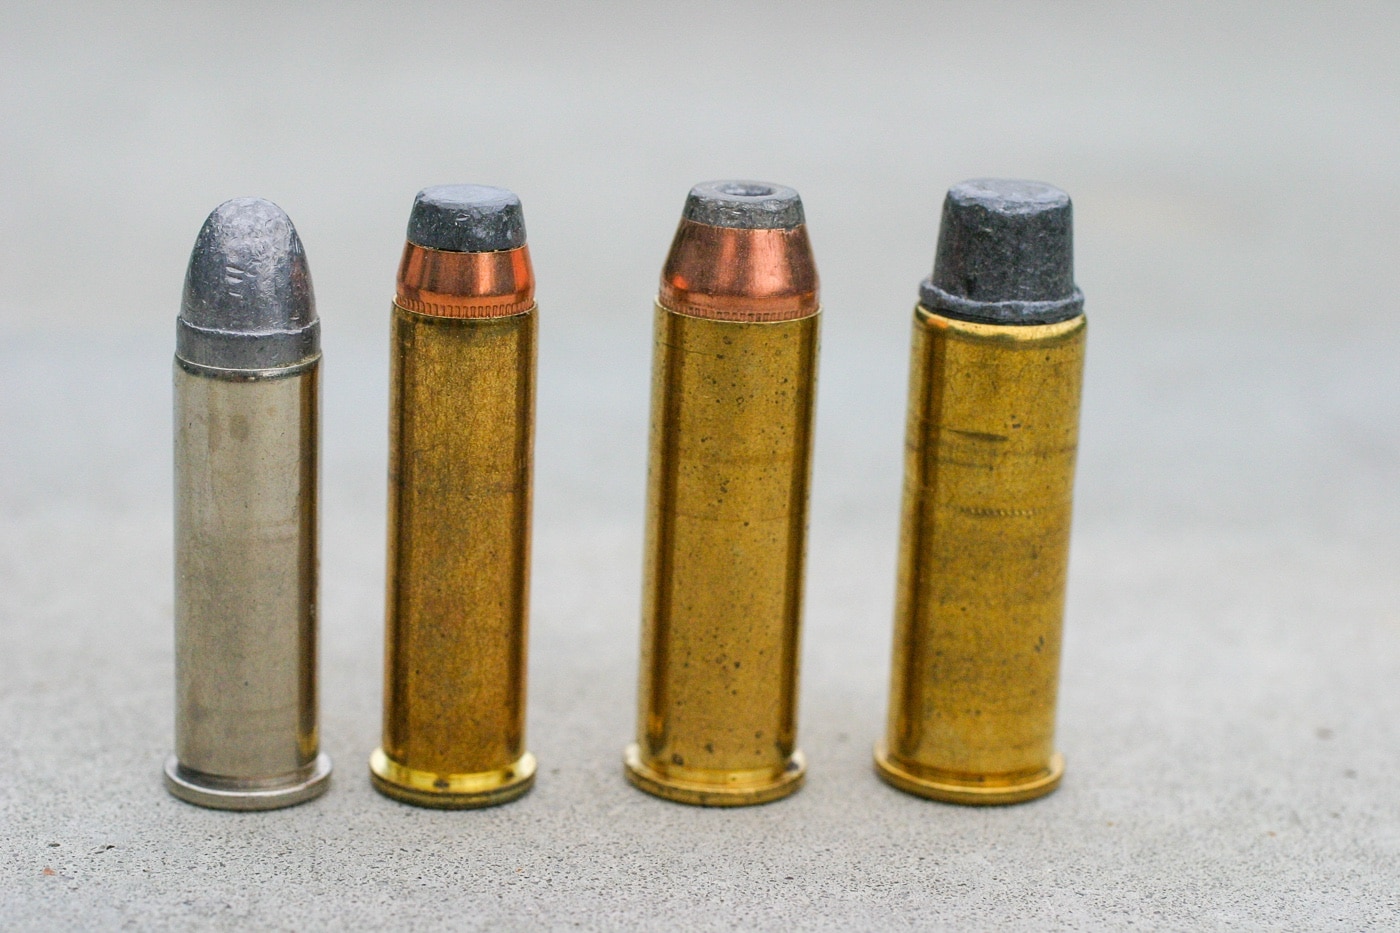 Shown in this digital image are four cartridges for revolvers. Each uses a different projectile which is the point to the illustration. From left to right, they are a lead round nose, semi-jacketed soft point bullet, a semi-jacketed hollow point bullet and a lead semi-wadcutter. A special note about the LSWC bullet — some effective hollow point bullets are made with semi-wadcutters. They have an open front, deep cavity and use soft lead to increase the probability of expansion.